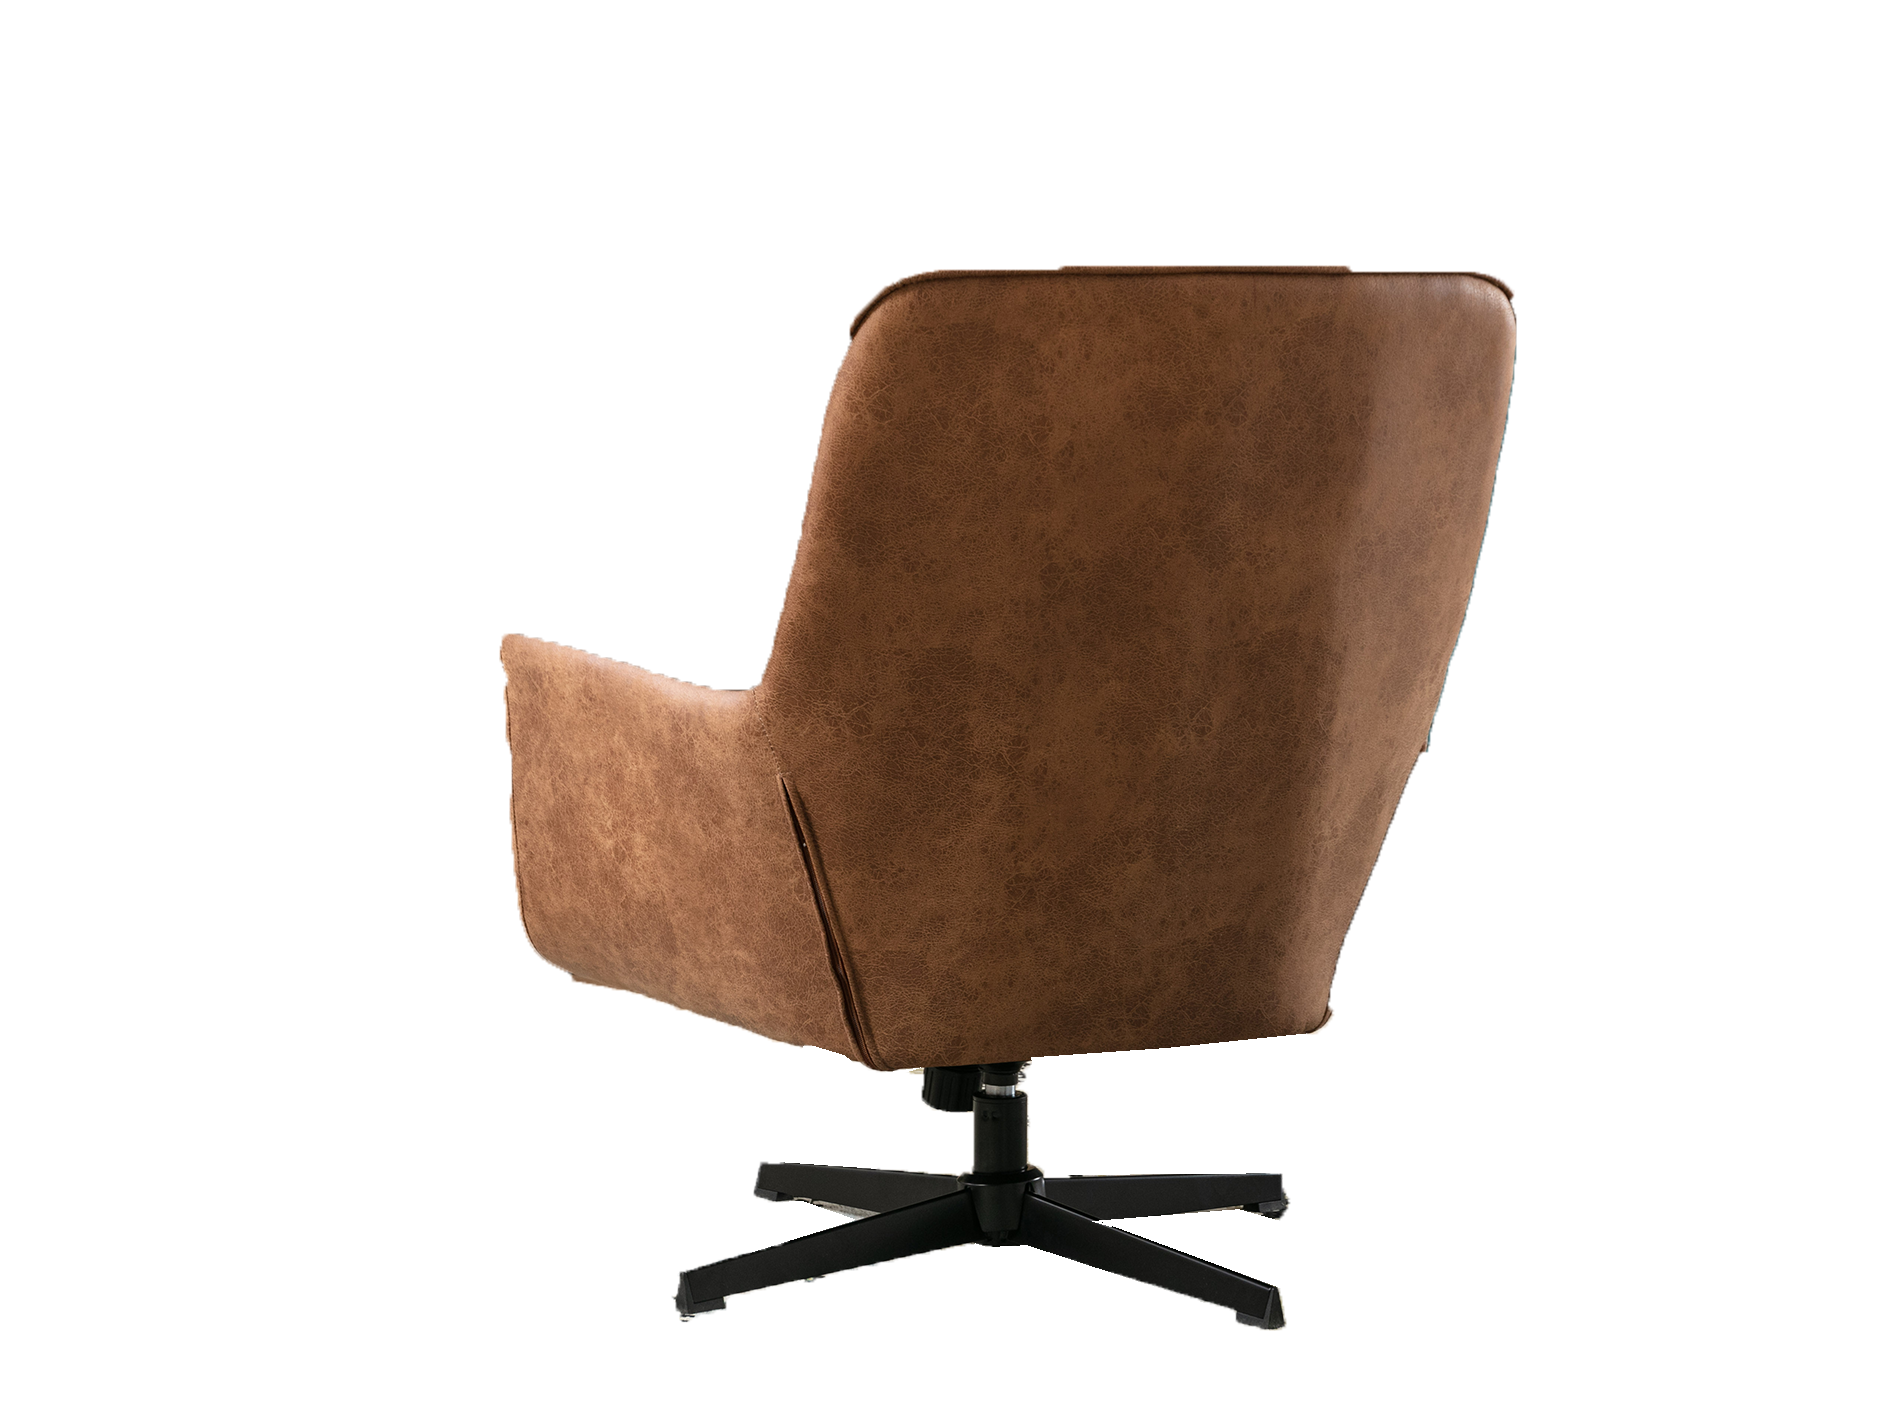 BT Wentworth Faux Leather Upholstered Swivel Chair